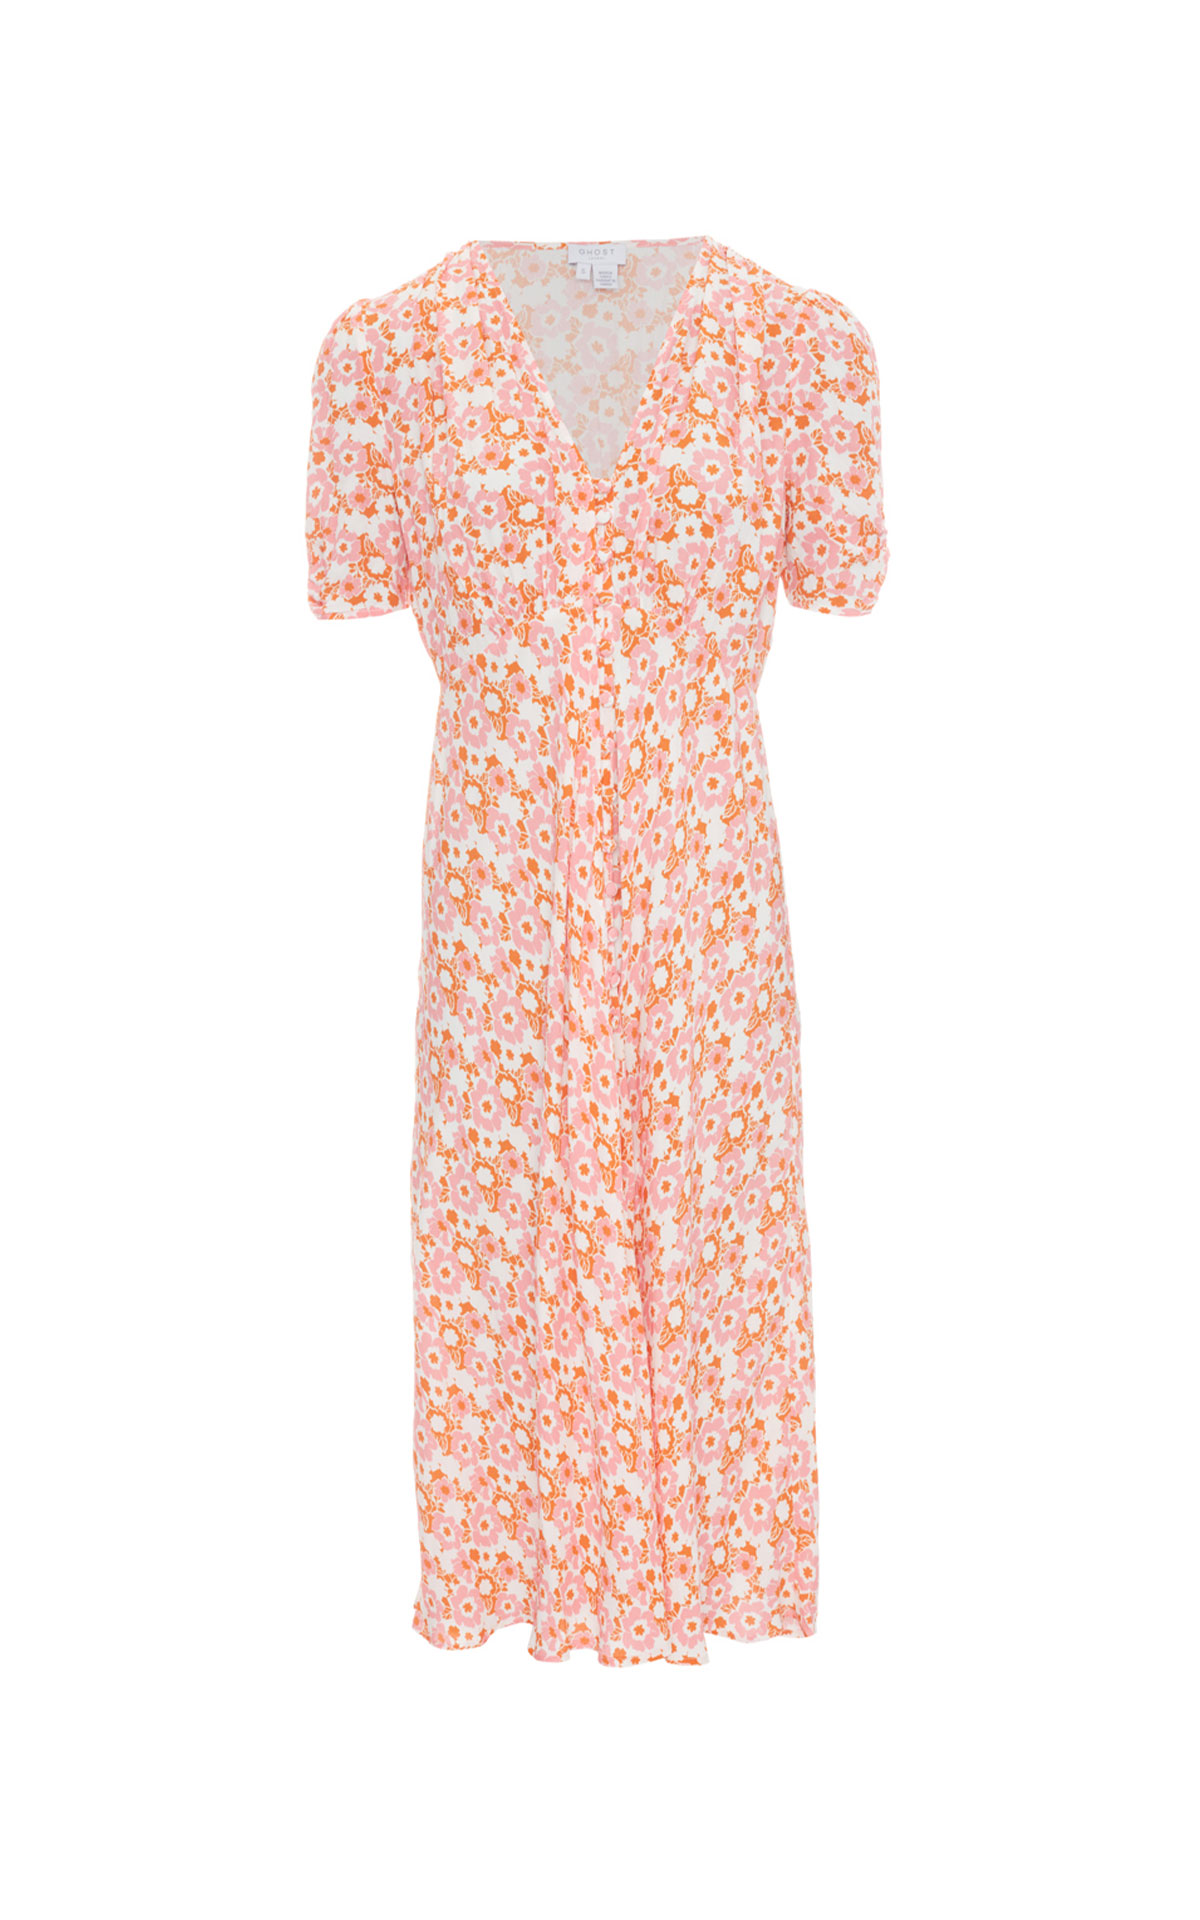 DO GOOD Ghost Floral dress from Bicester Village